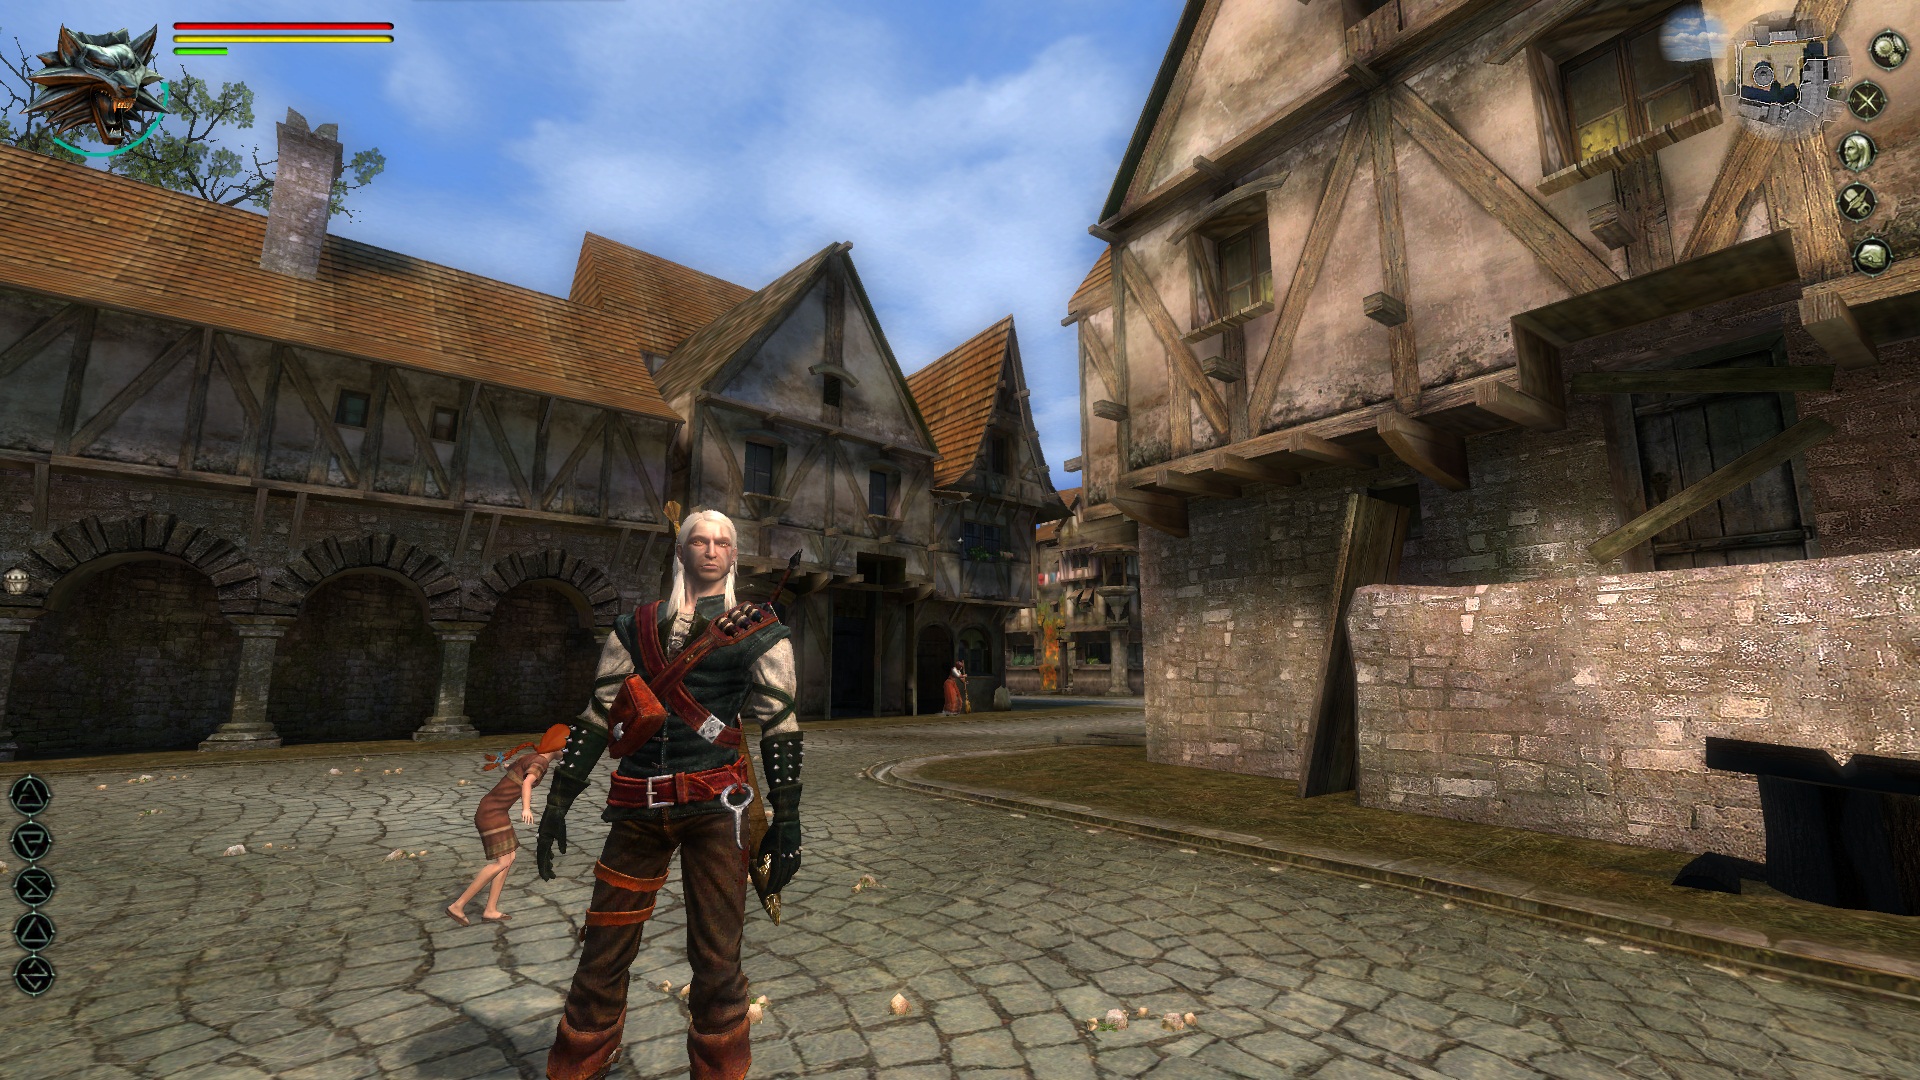 the witcher 1 pc game download